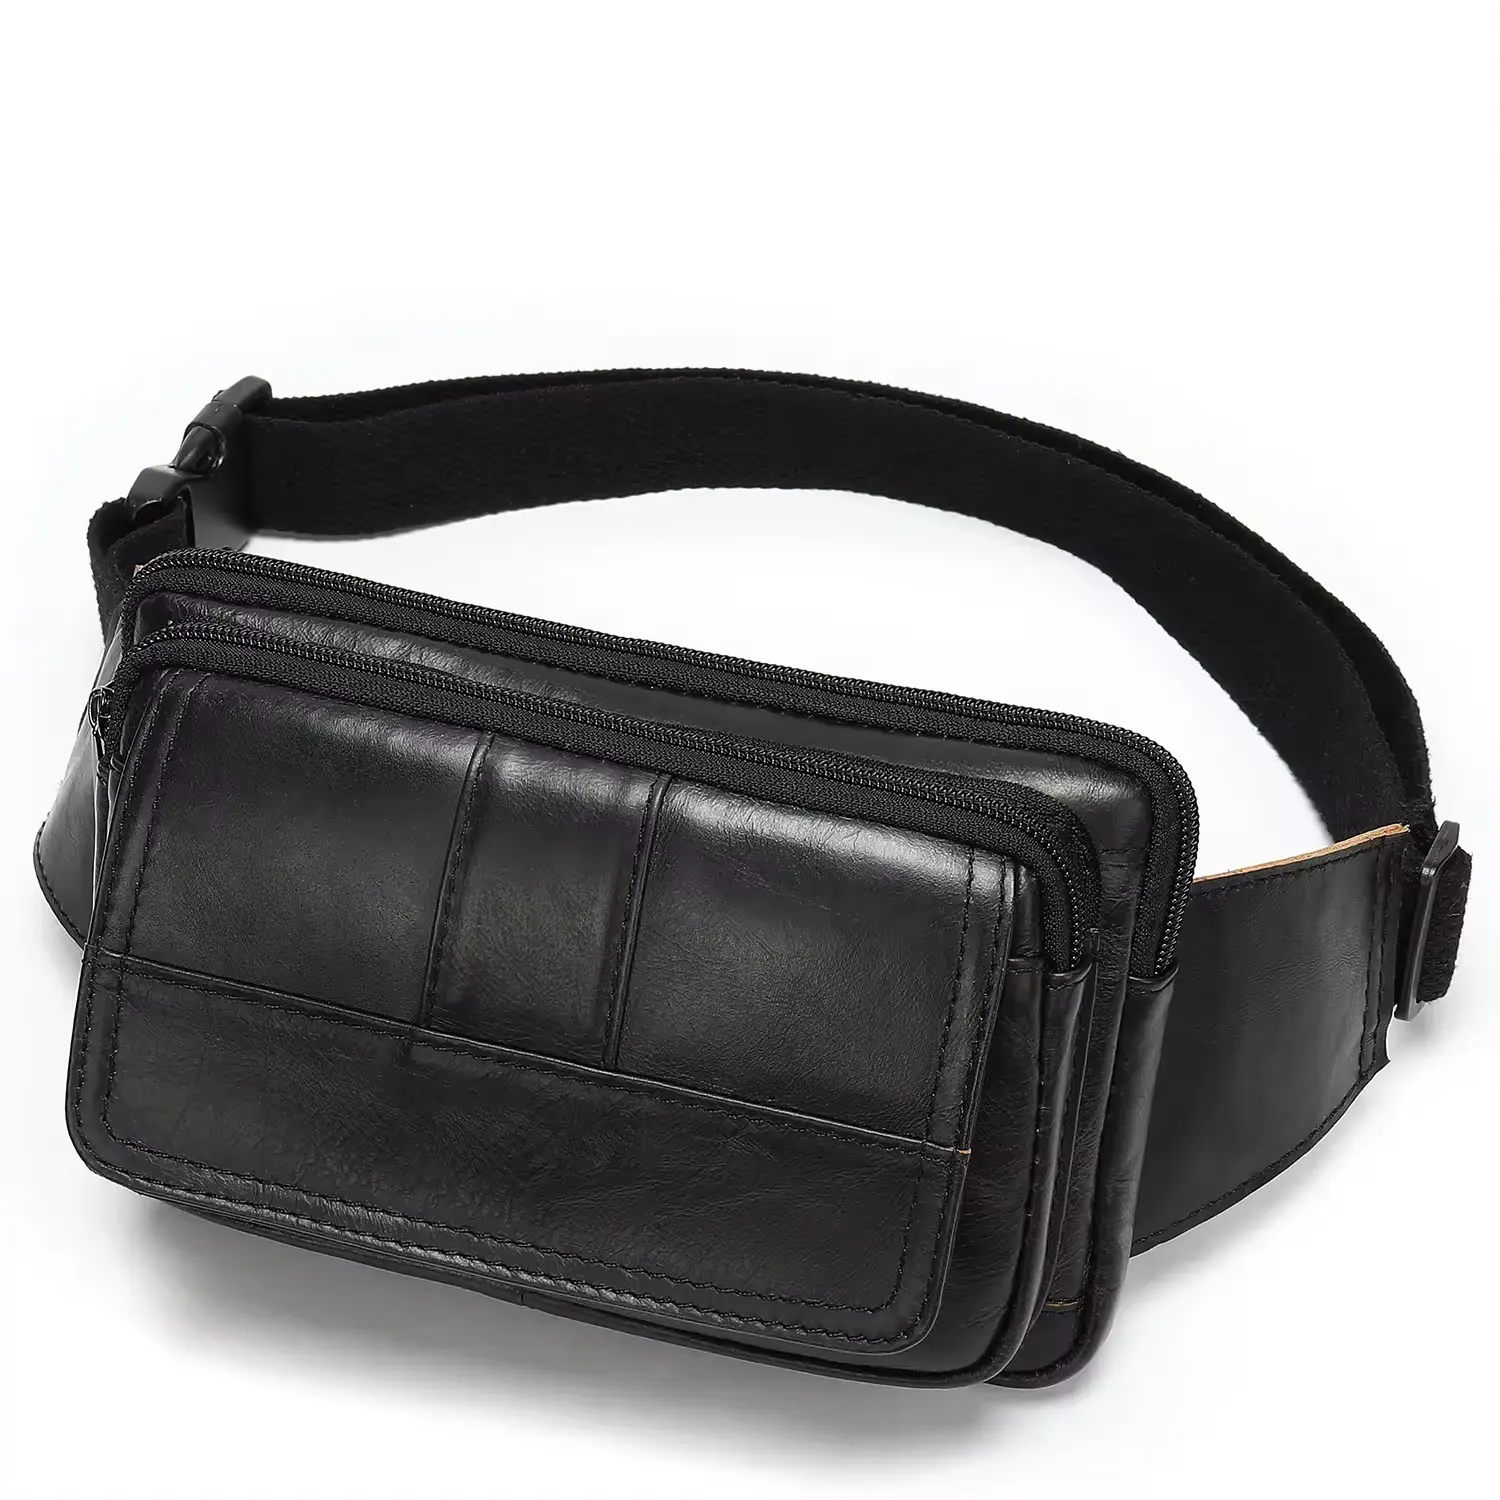 Leather Waist Pouch Bag Leather Sling Waist Bag for Hiking Running Travel Fanny Pack for Men and Women